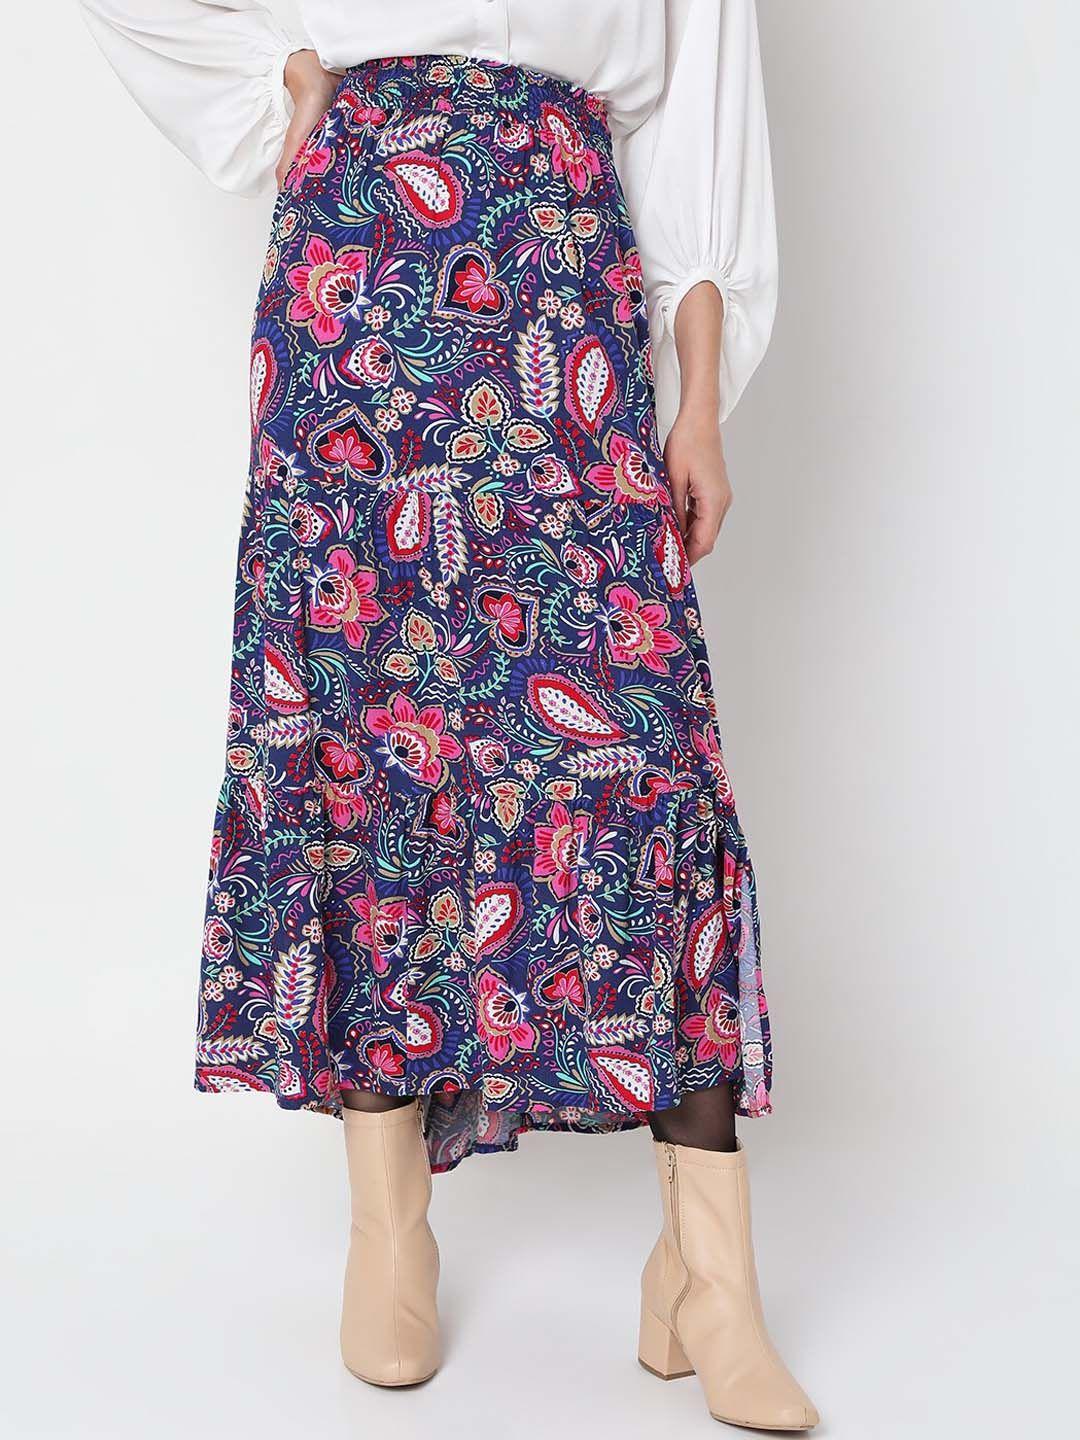 vero-moda-blue-&-pink-floral-printed-a-line-midi-flared-skirts